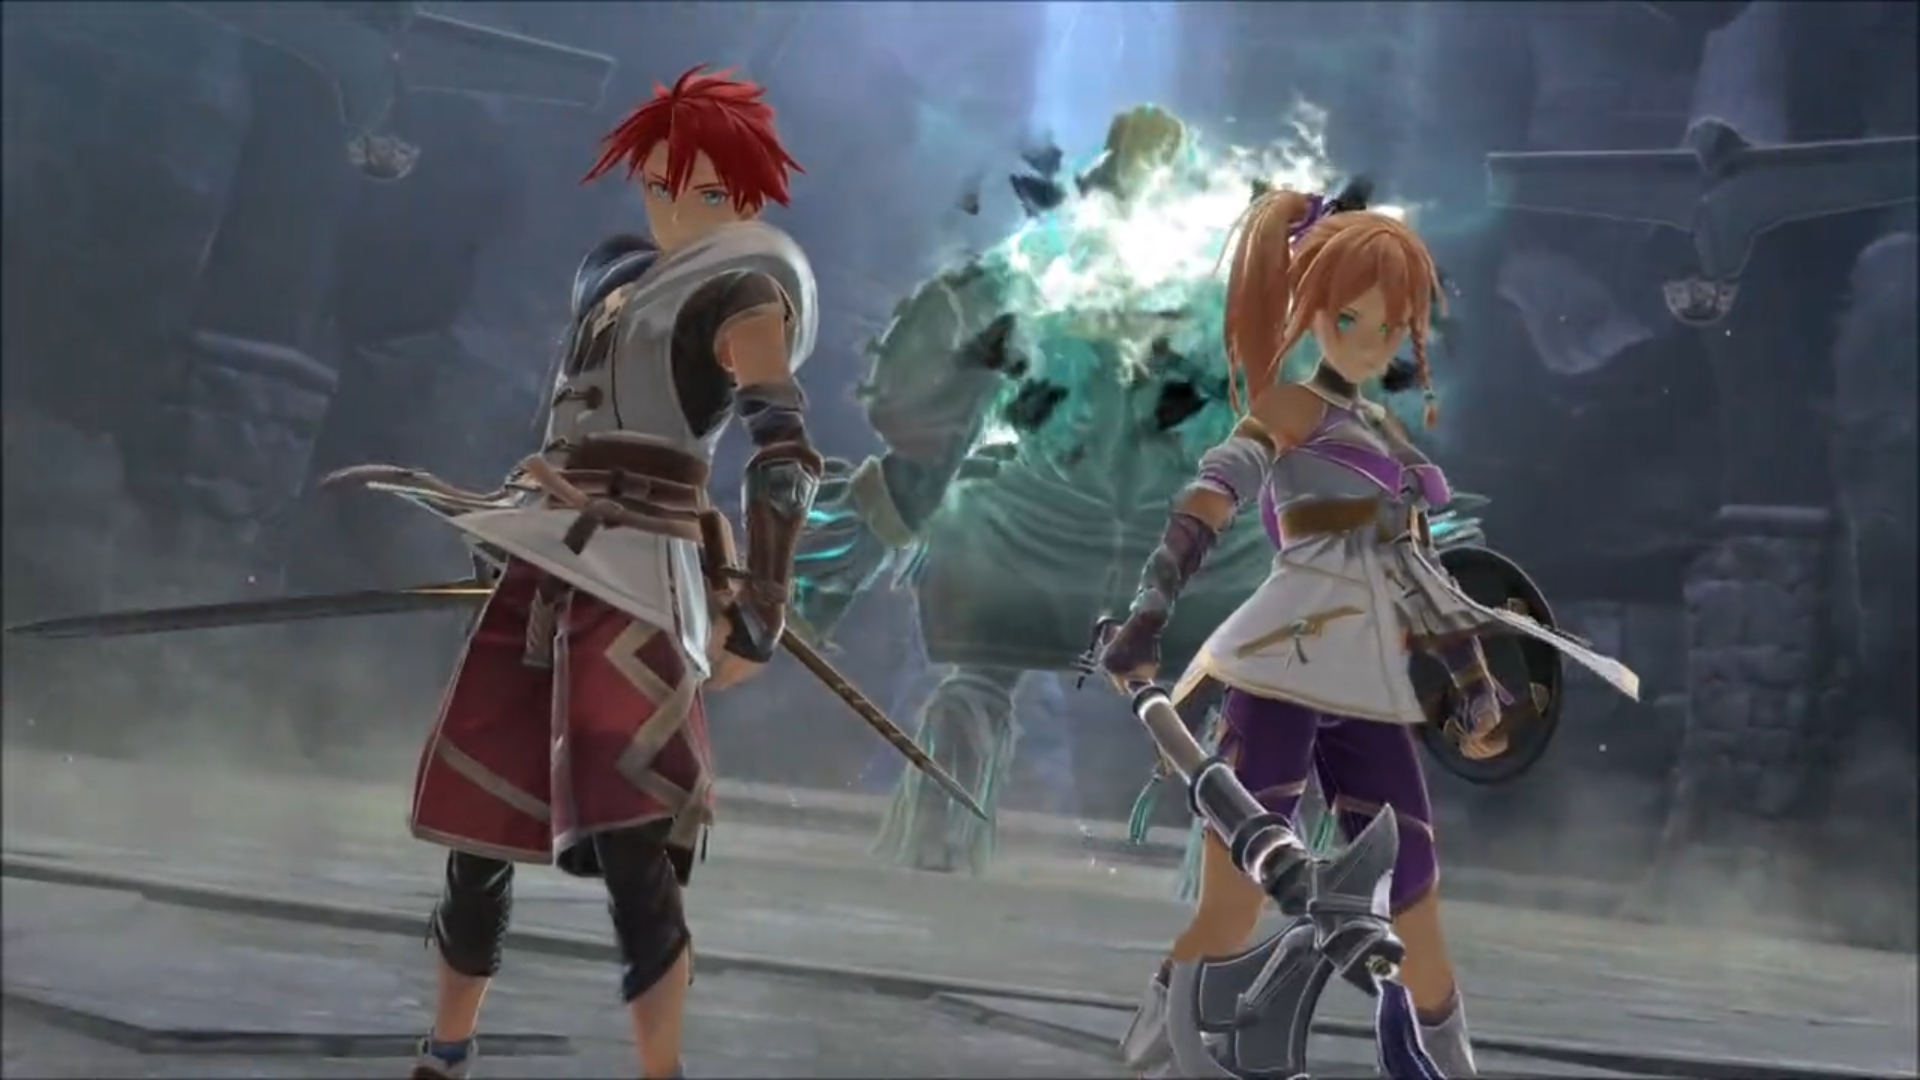 Ys X Nordics Reveals New Trailer; Features In-Game BGM